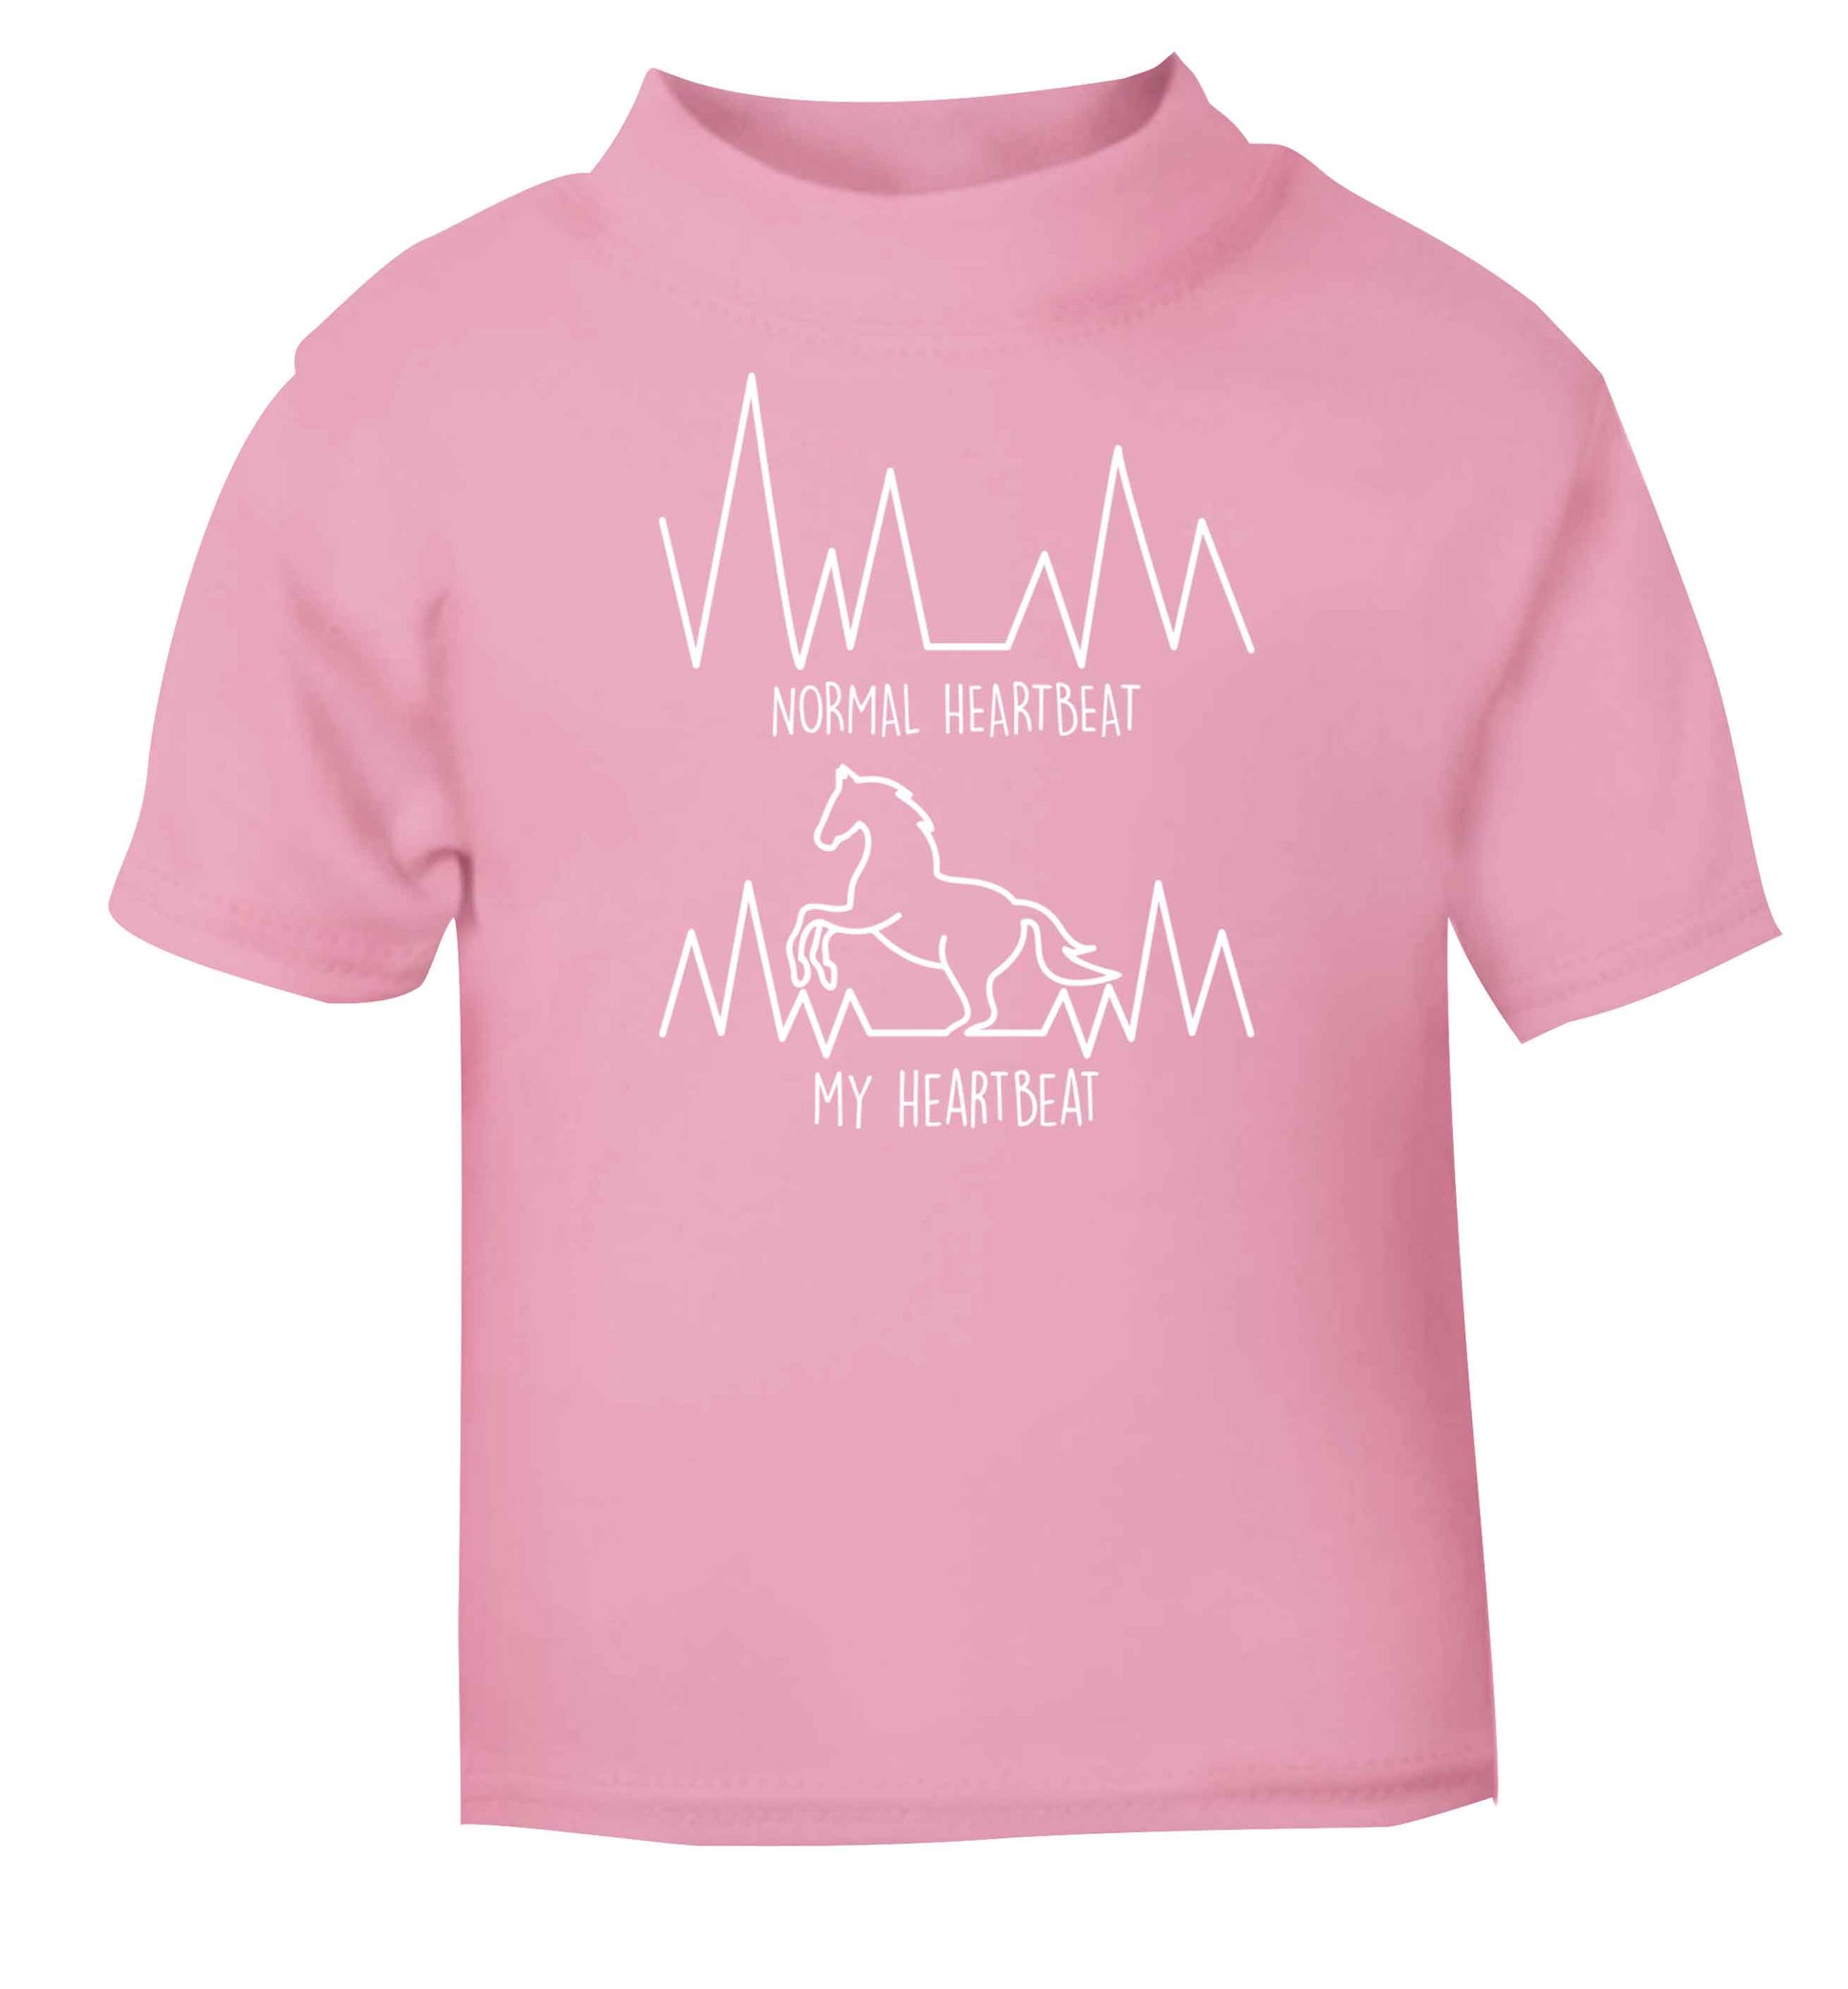 Horse - Normal heartbeat my heartbeat light pink baby toddler Tshirt 2 Years